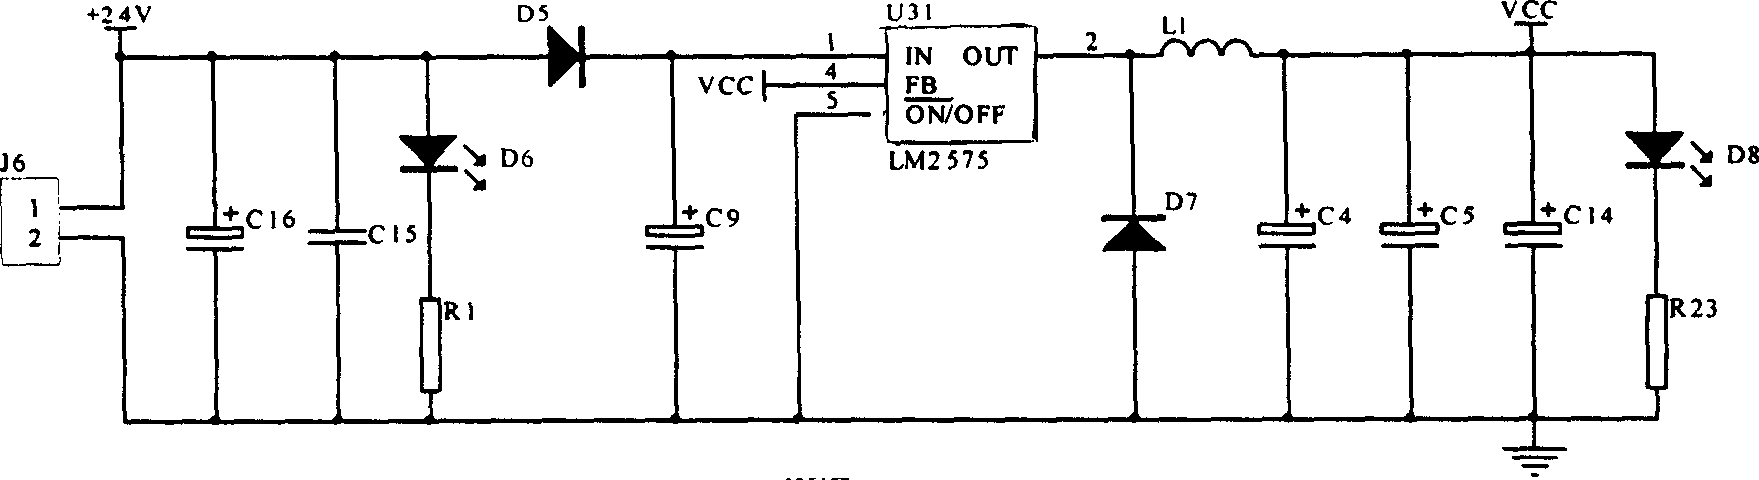 Intelligent control board for electronic dobby device